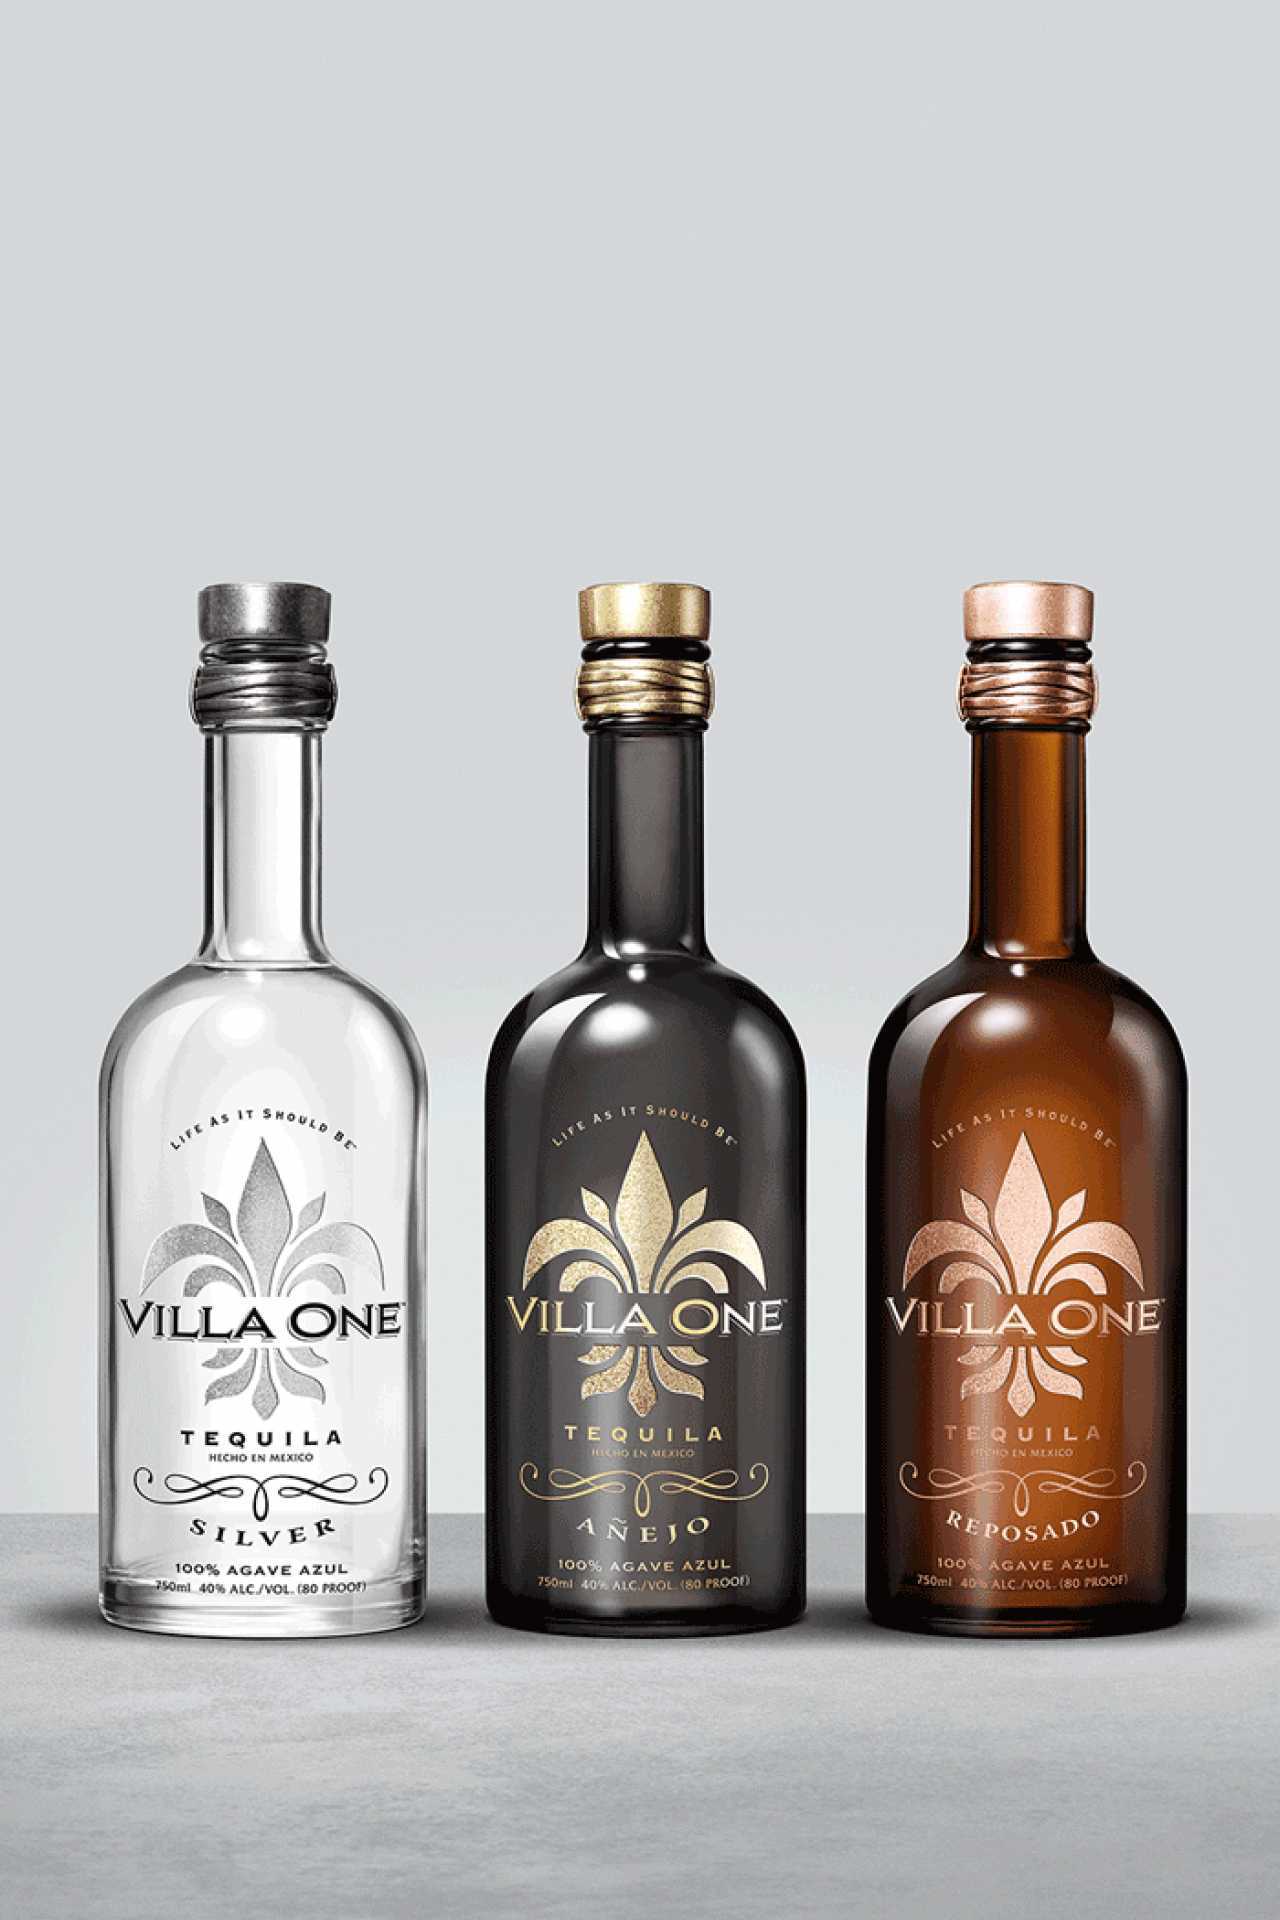 Nick Jonas and John Varvatos's Villa One Tequila's silver, reposado and añejo are available in Canada